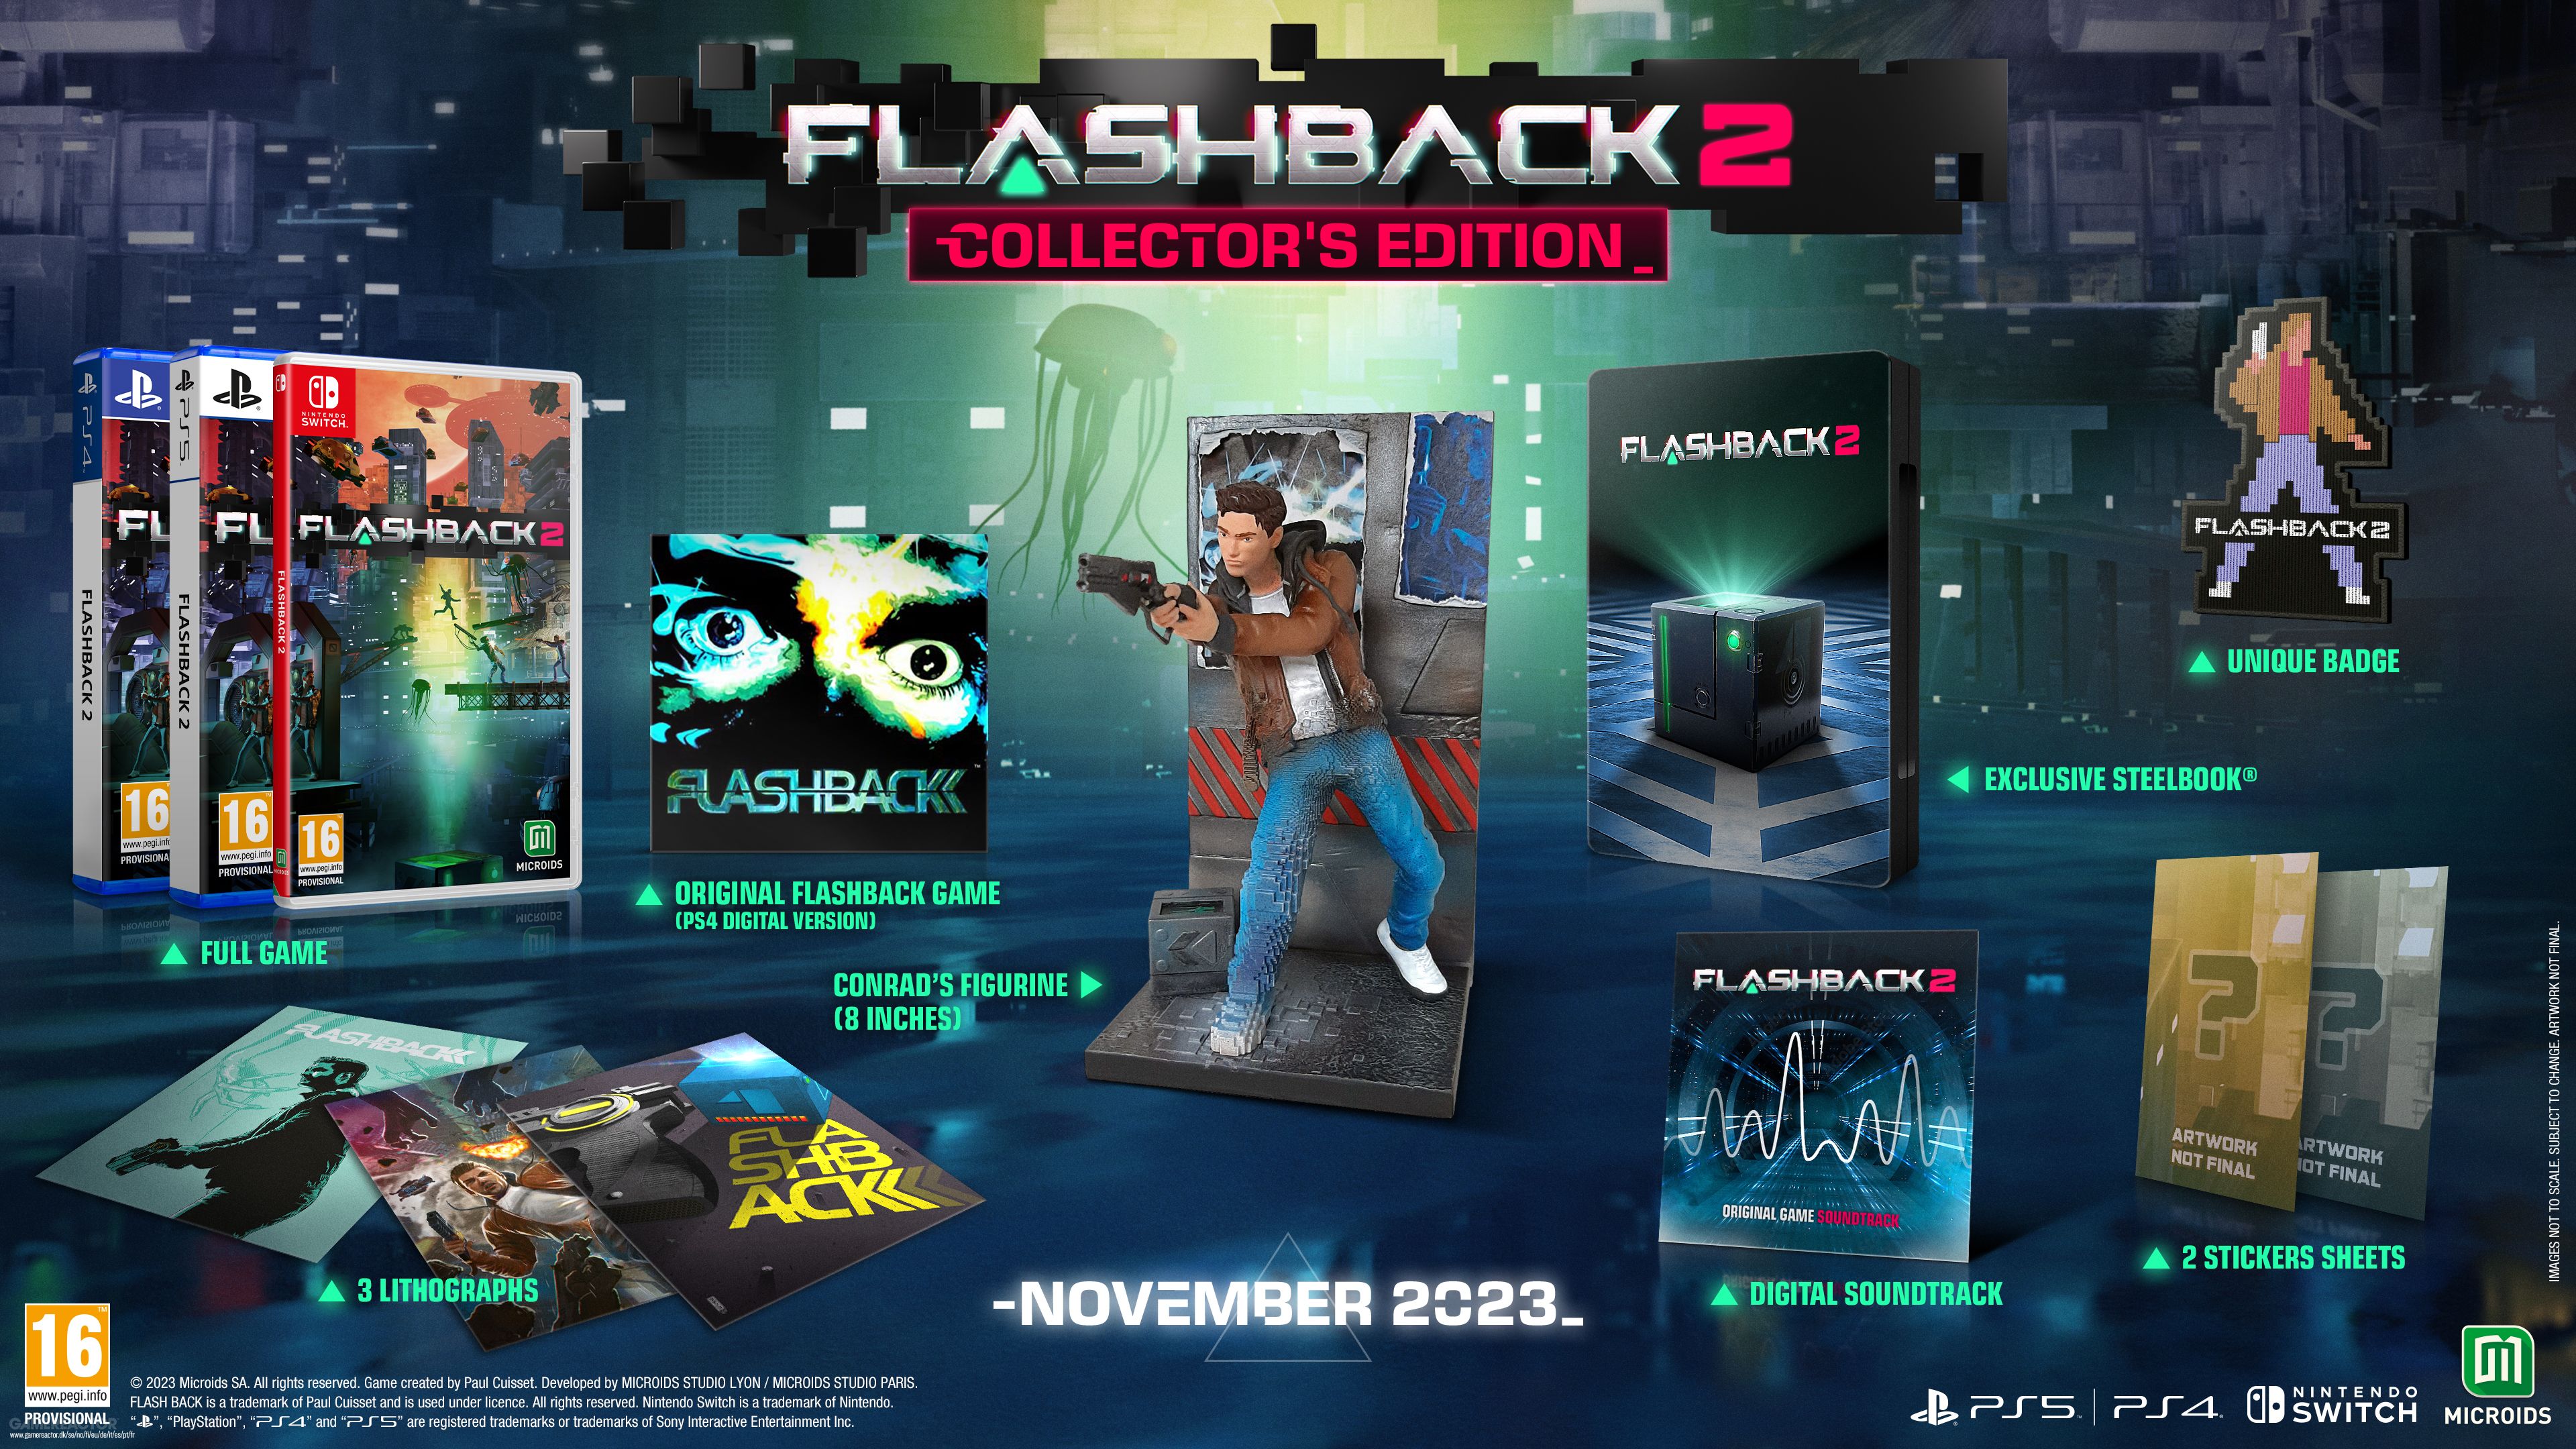 Flashback 2 confirms its release date with the announcement of two physical editions